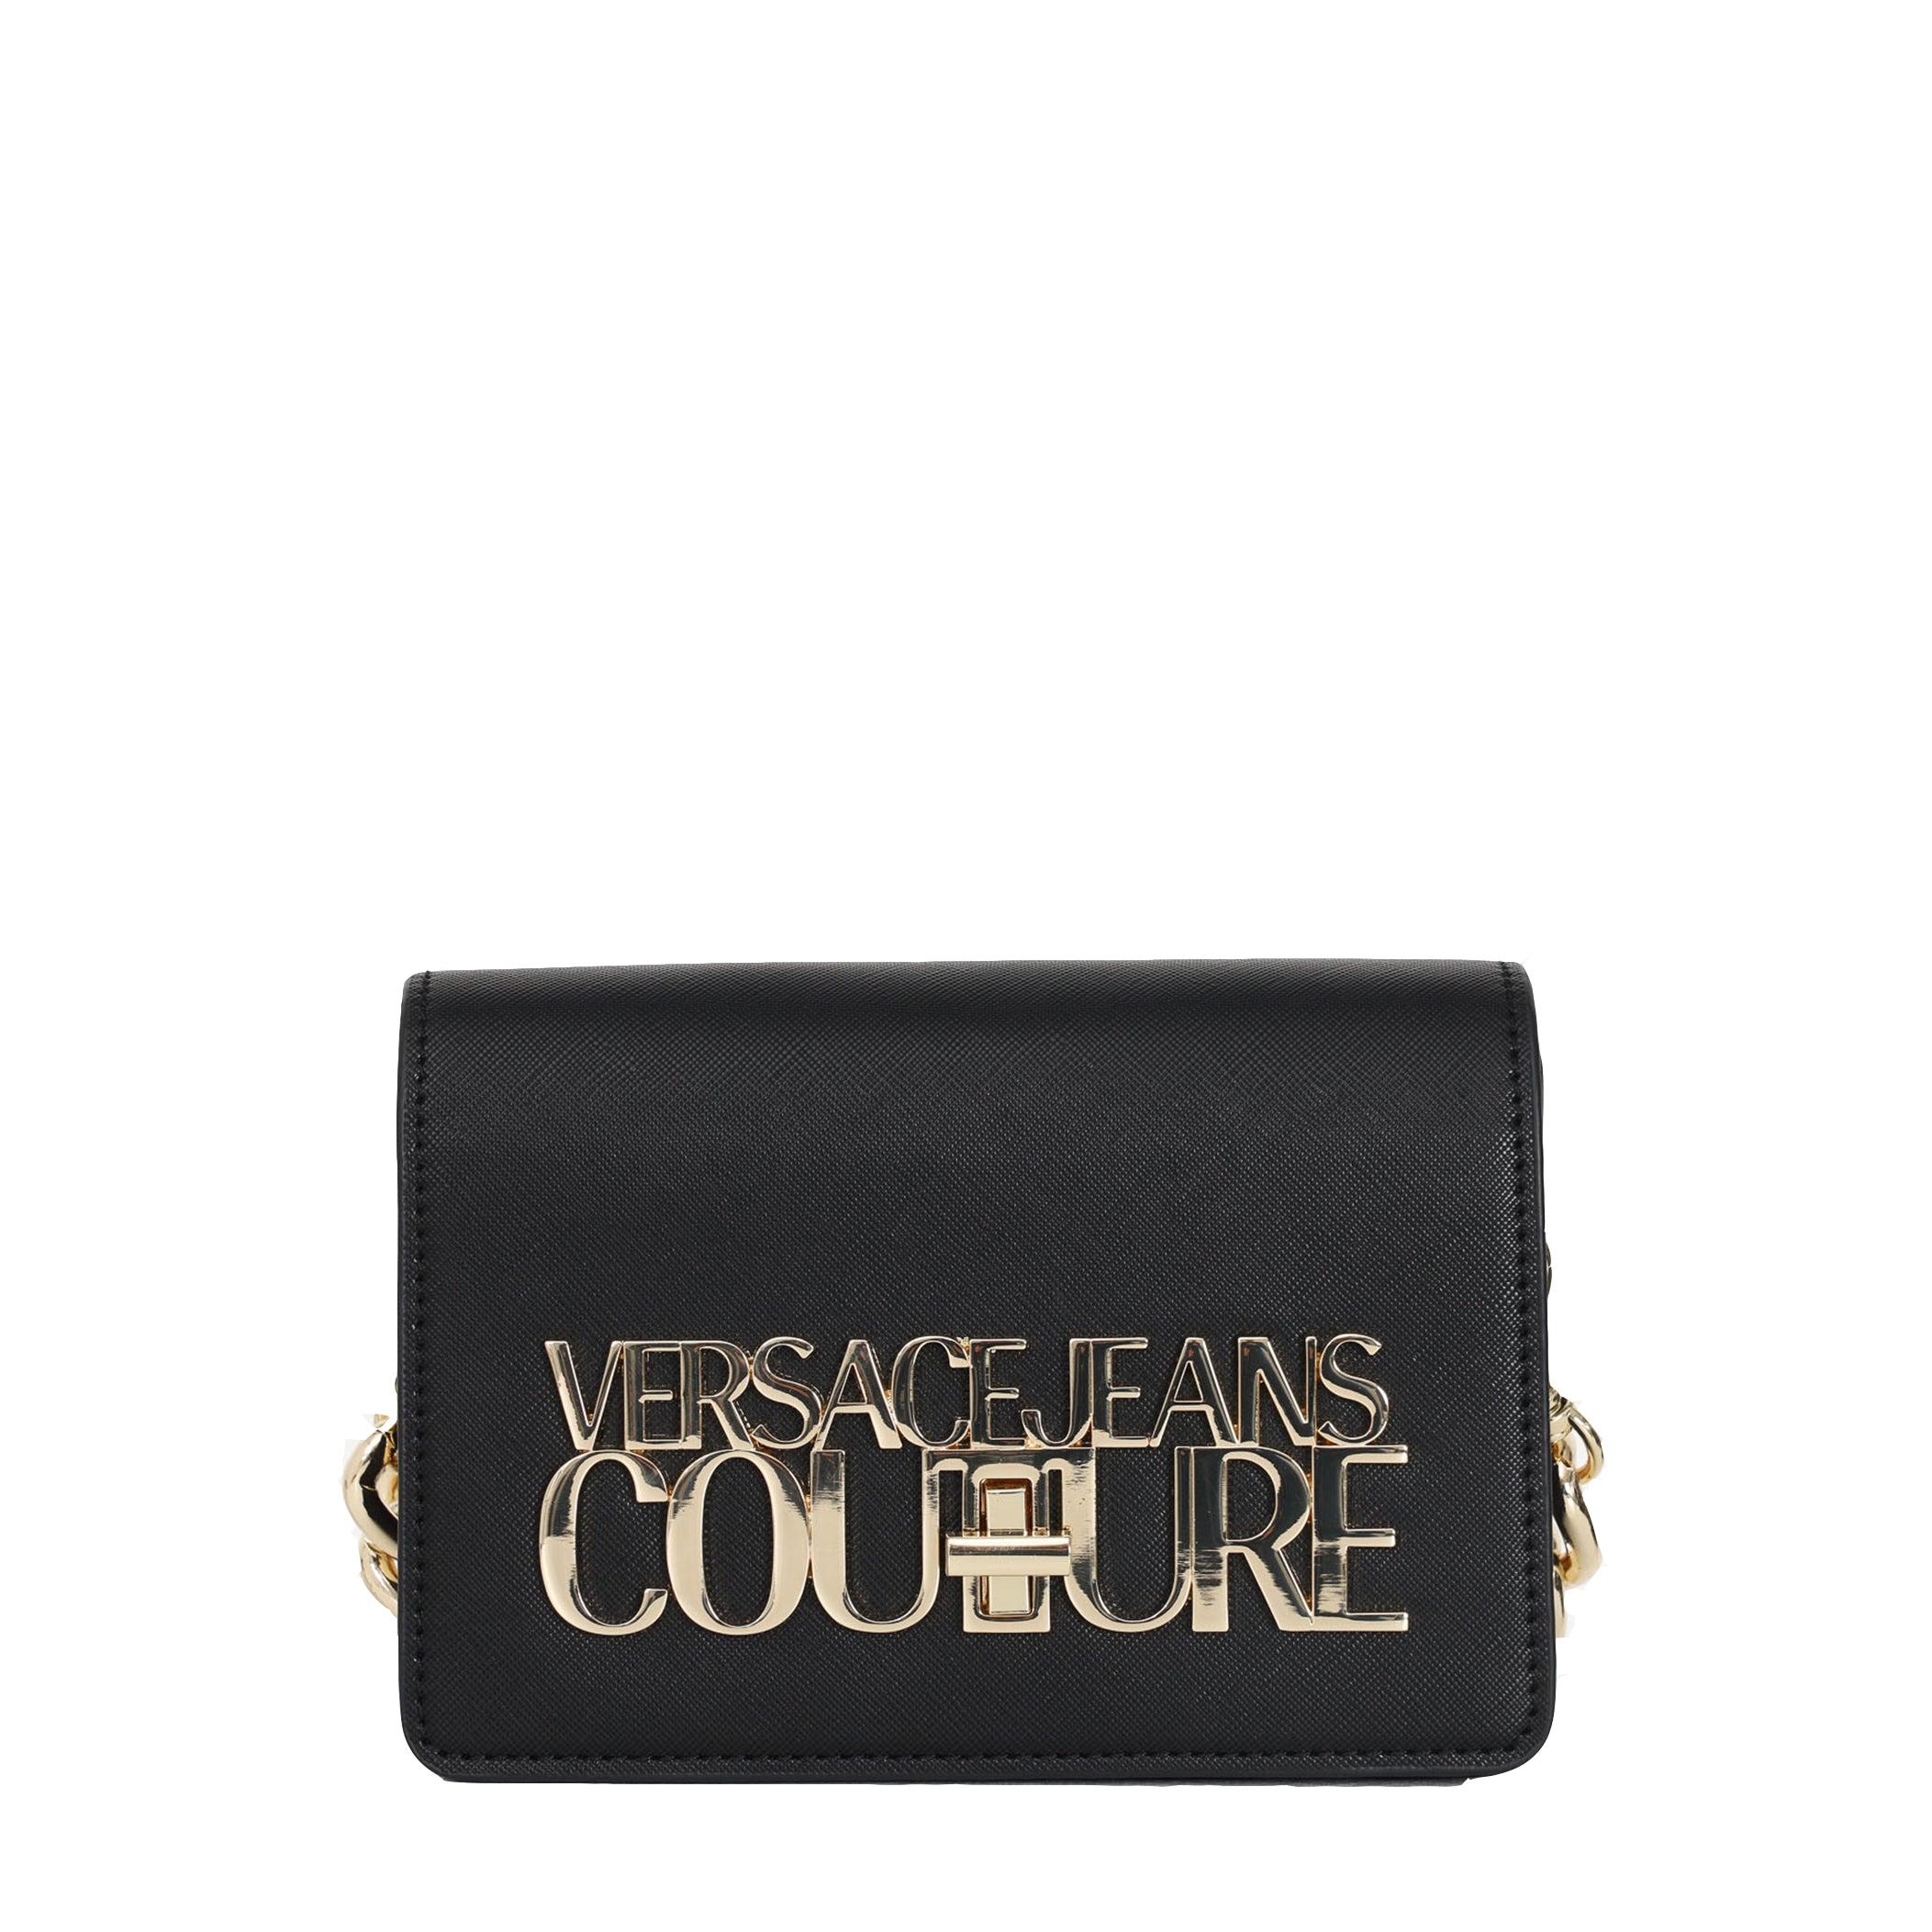 Versace Jeans Couture Borsa A Tracolla Black/gold | Lyst